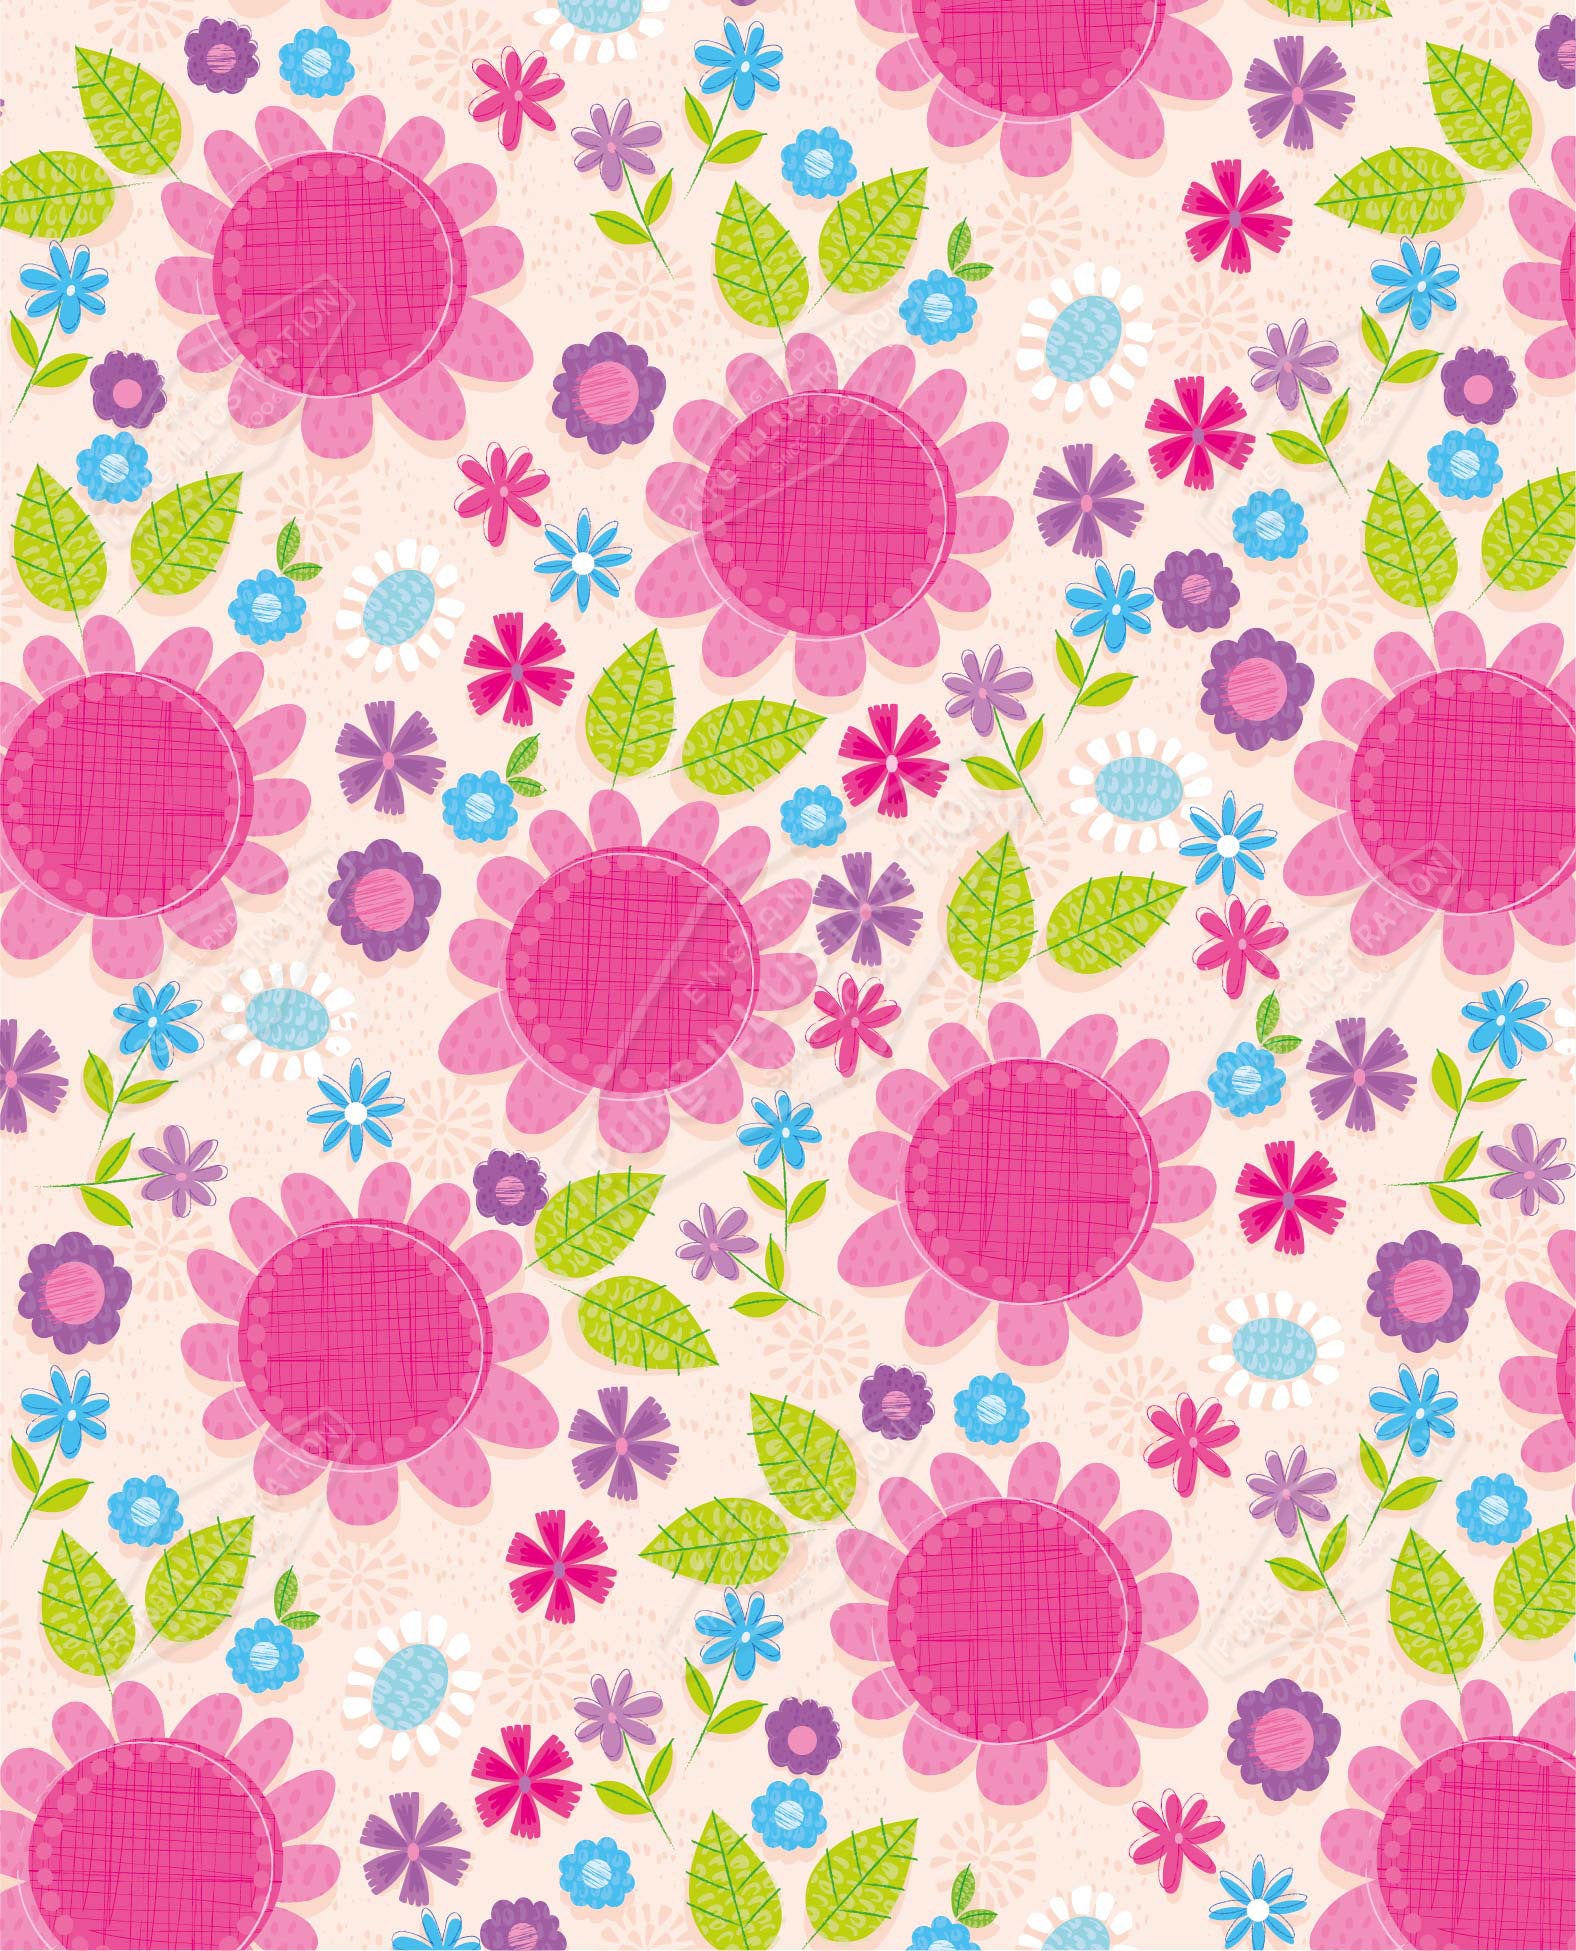 00035181SPI- Sarah Pitt is represented by Pure Art Licensing Agency - Everyday Pattern Design